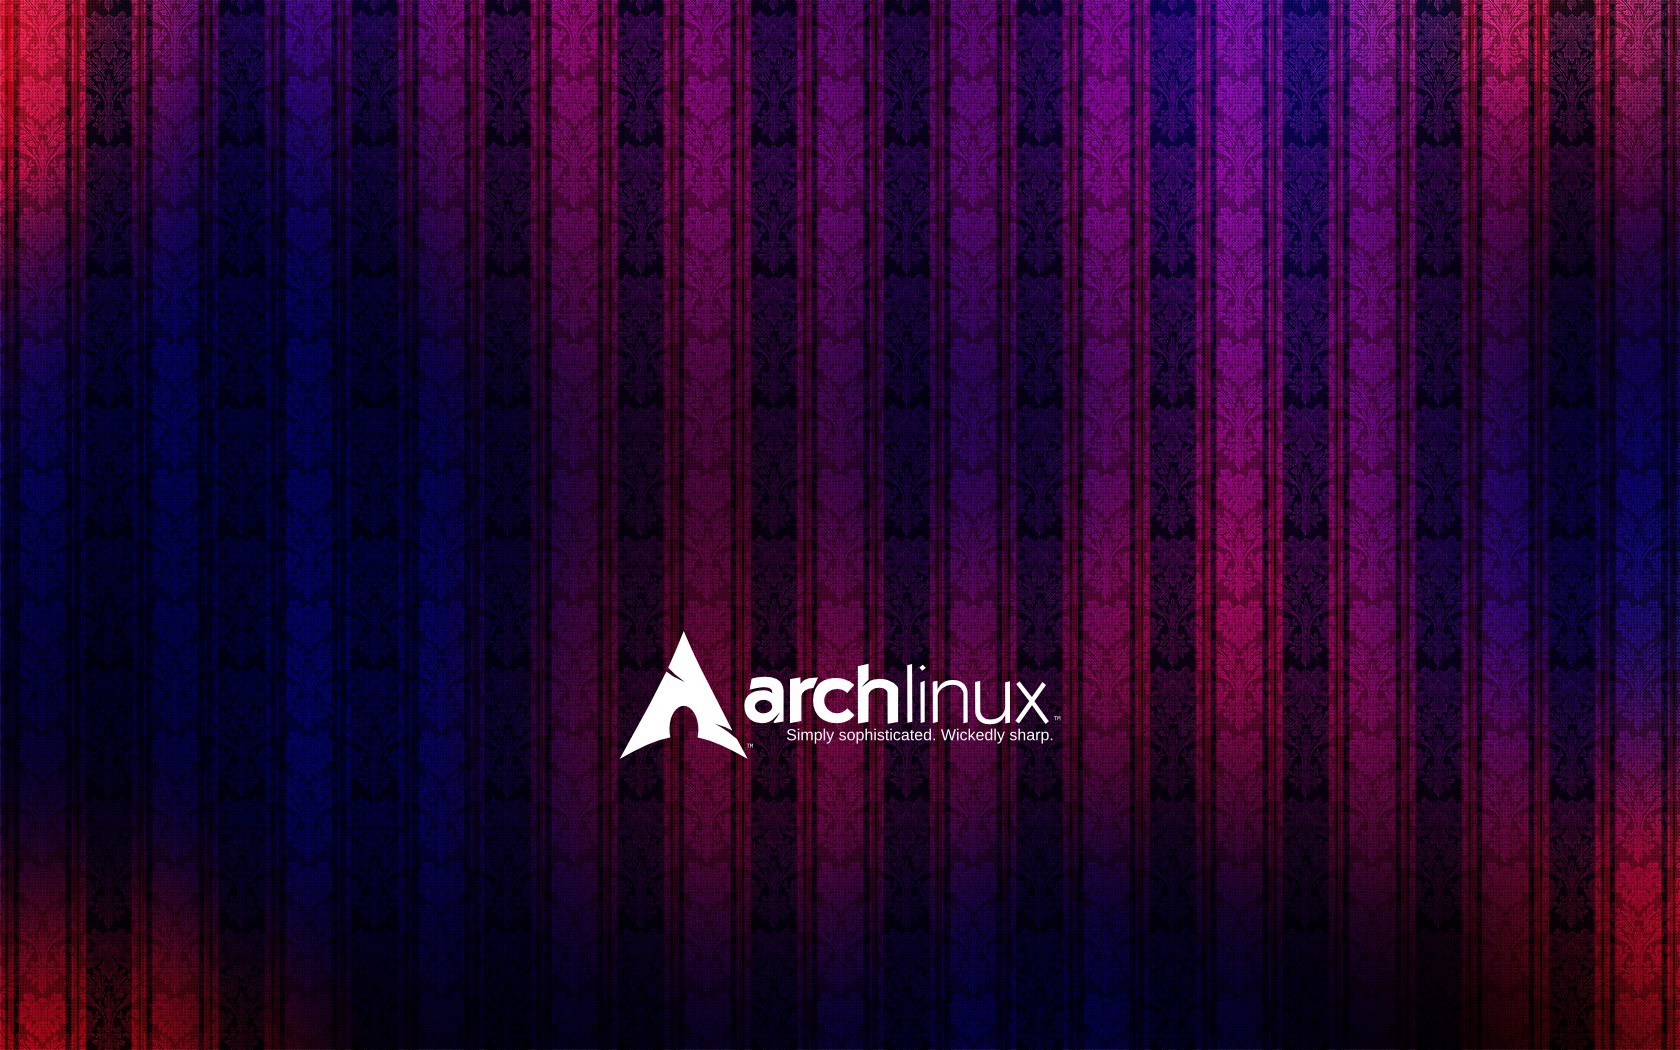 Arch Linux Wallpaper on Linux Arch Hd Wallpaper   Computer   Systems   793137